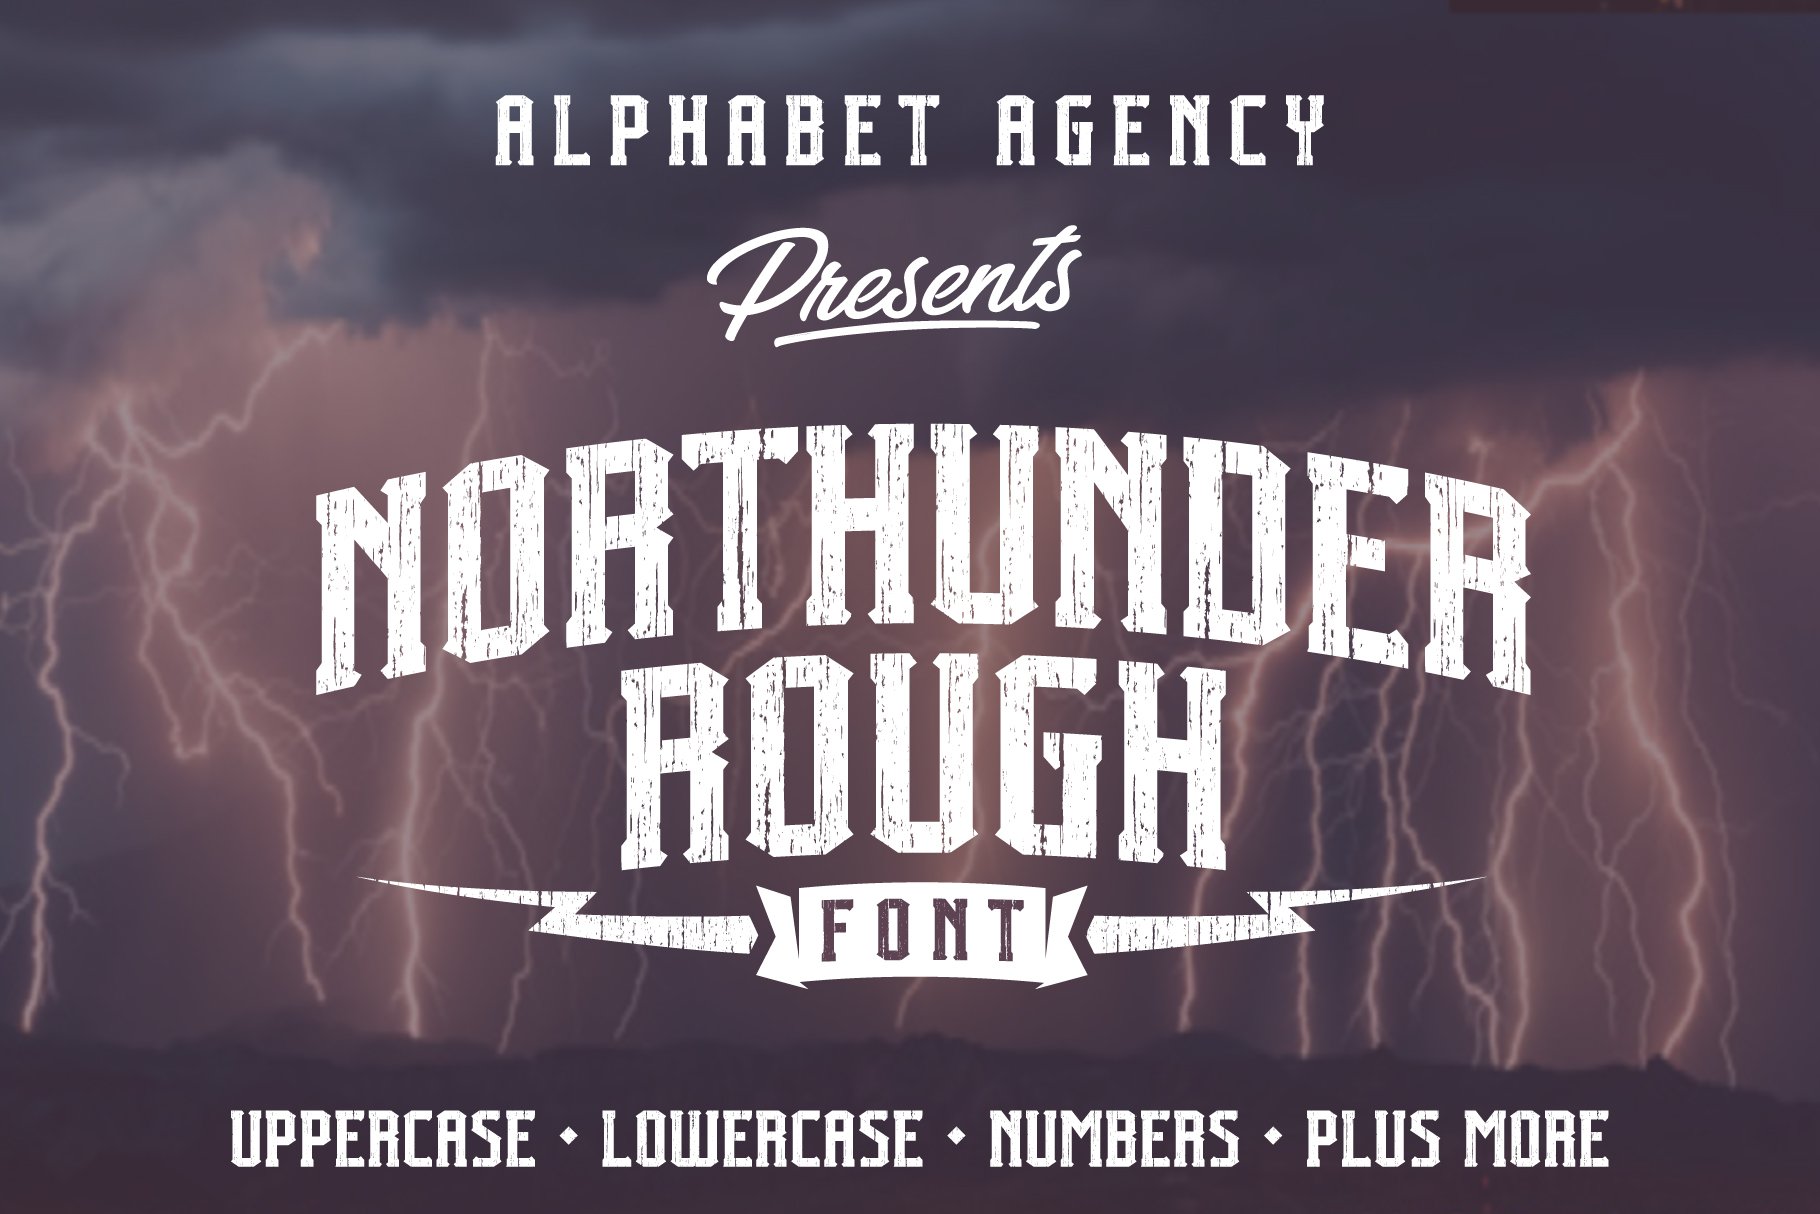 NORTHUNDER ROUGH FONT cover image.